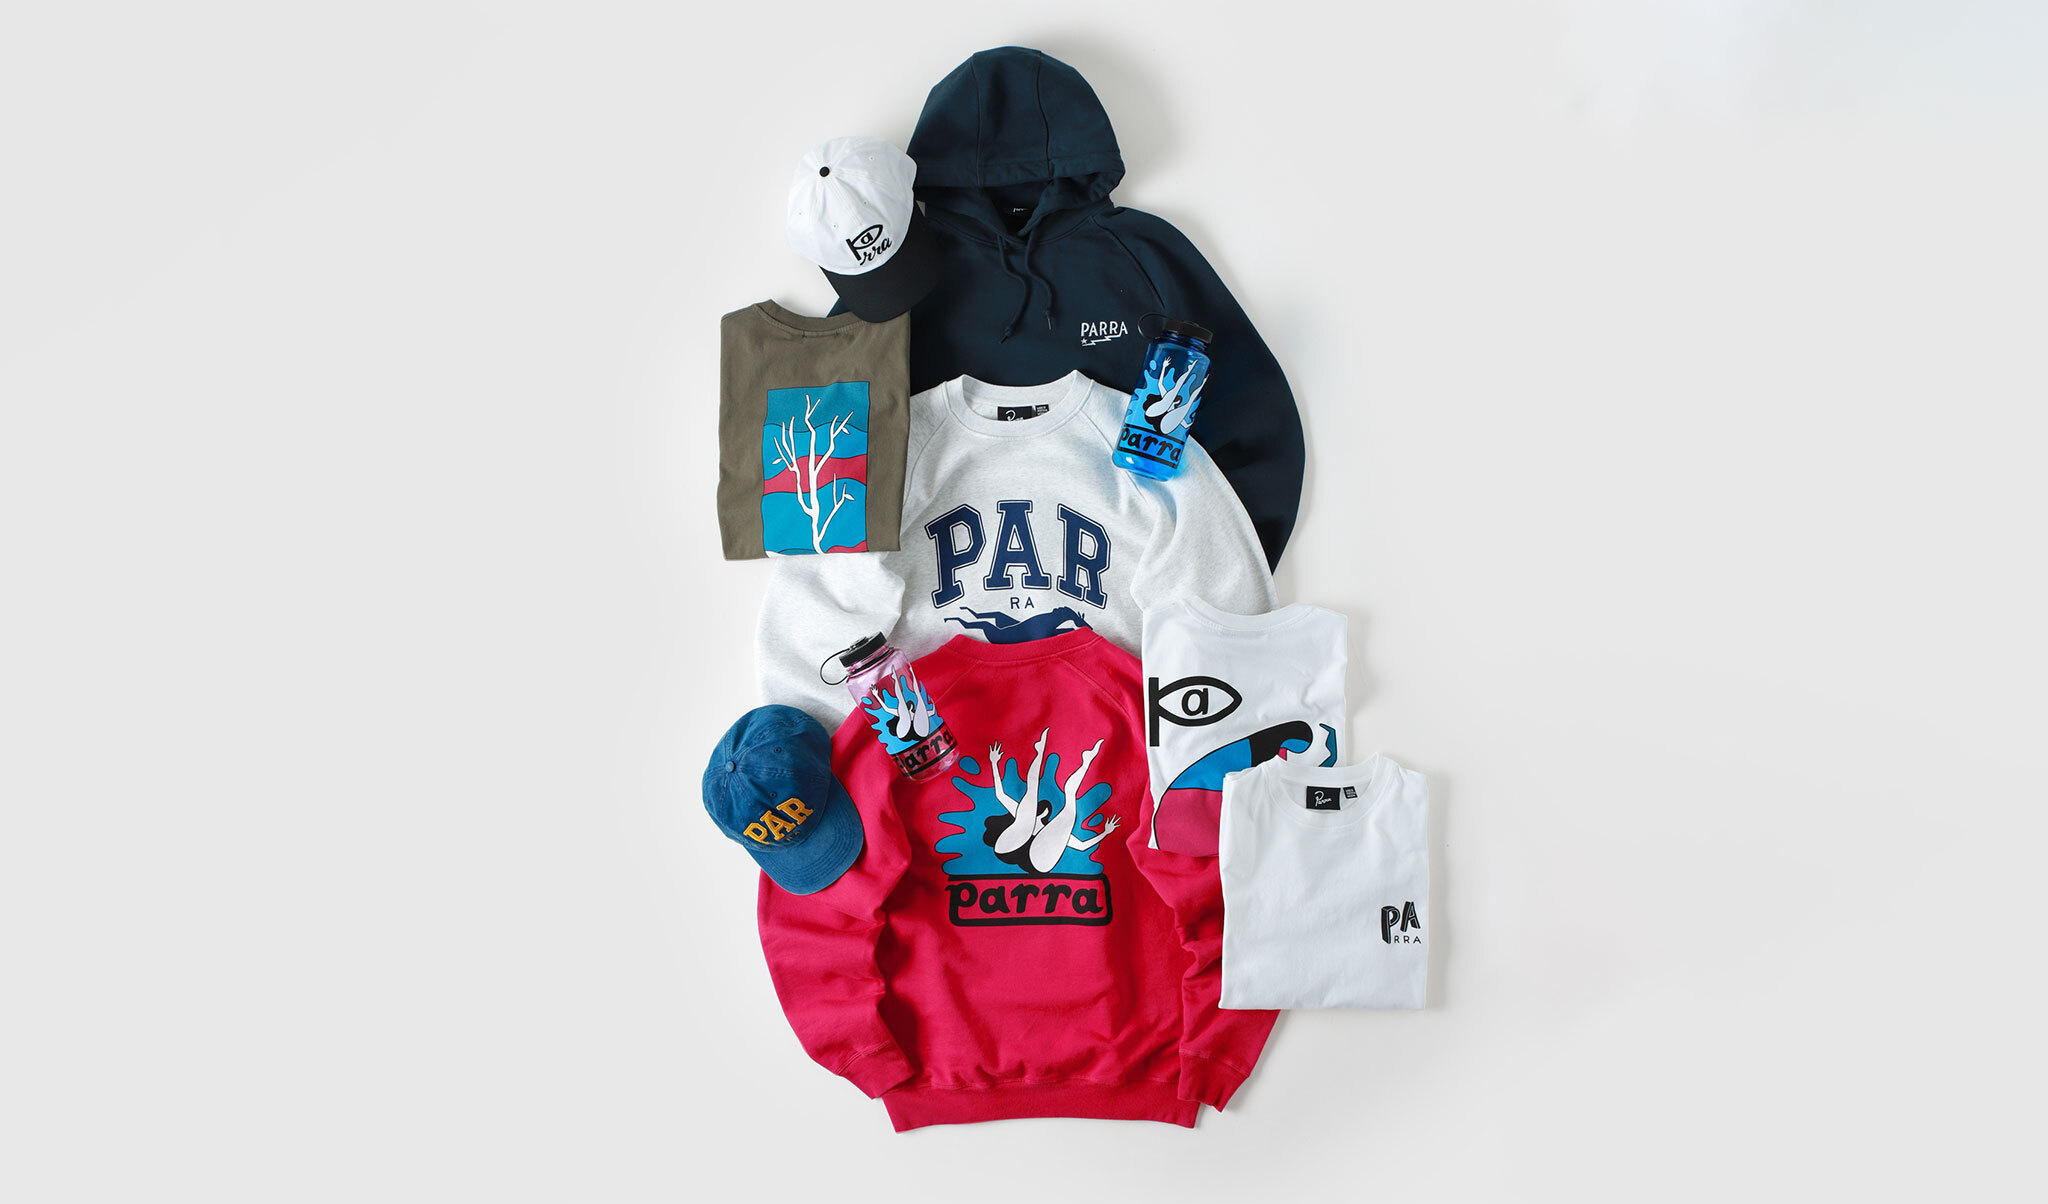 Don't sleep: By Parra is here